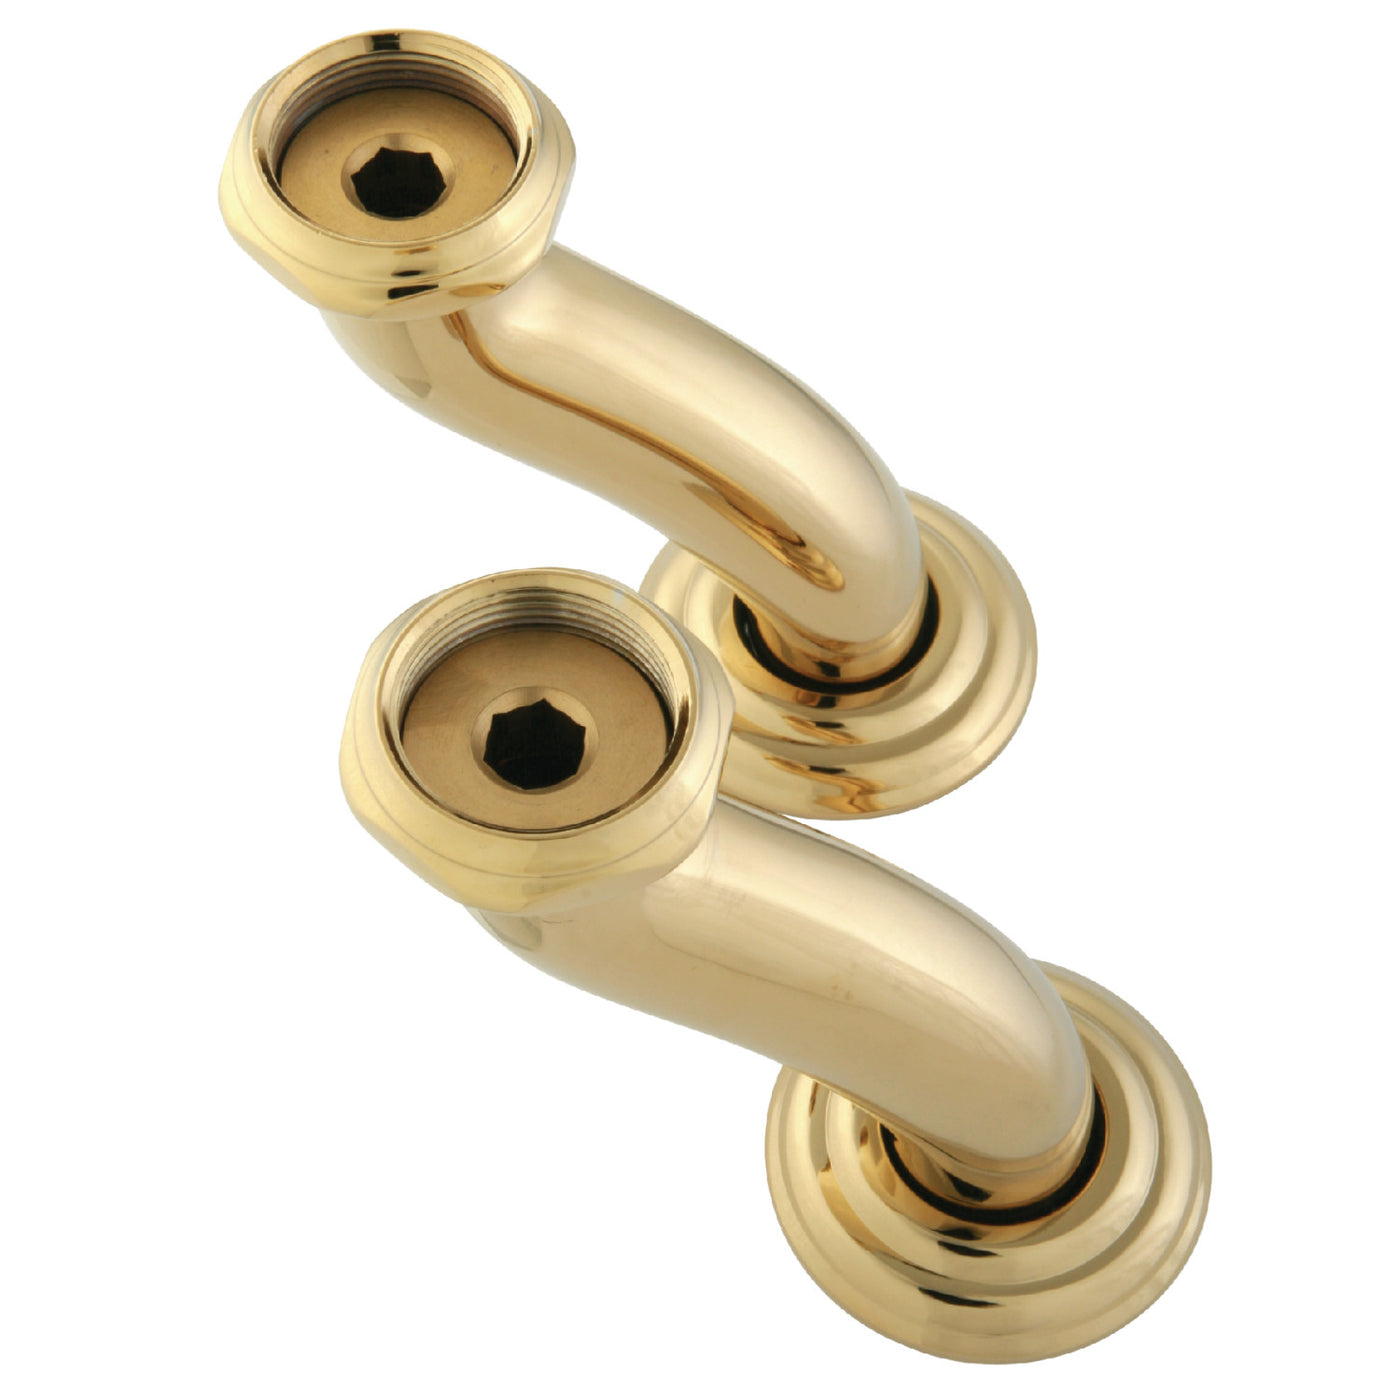 Elements of Design DSU402 S Shape Swing Elbow for Deck Mount Tub Filler CC410T2 Series, Polished Brass